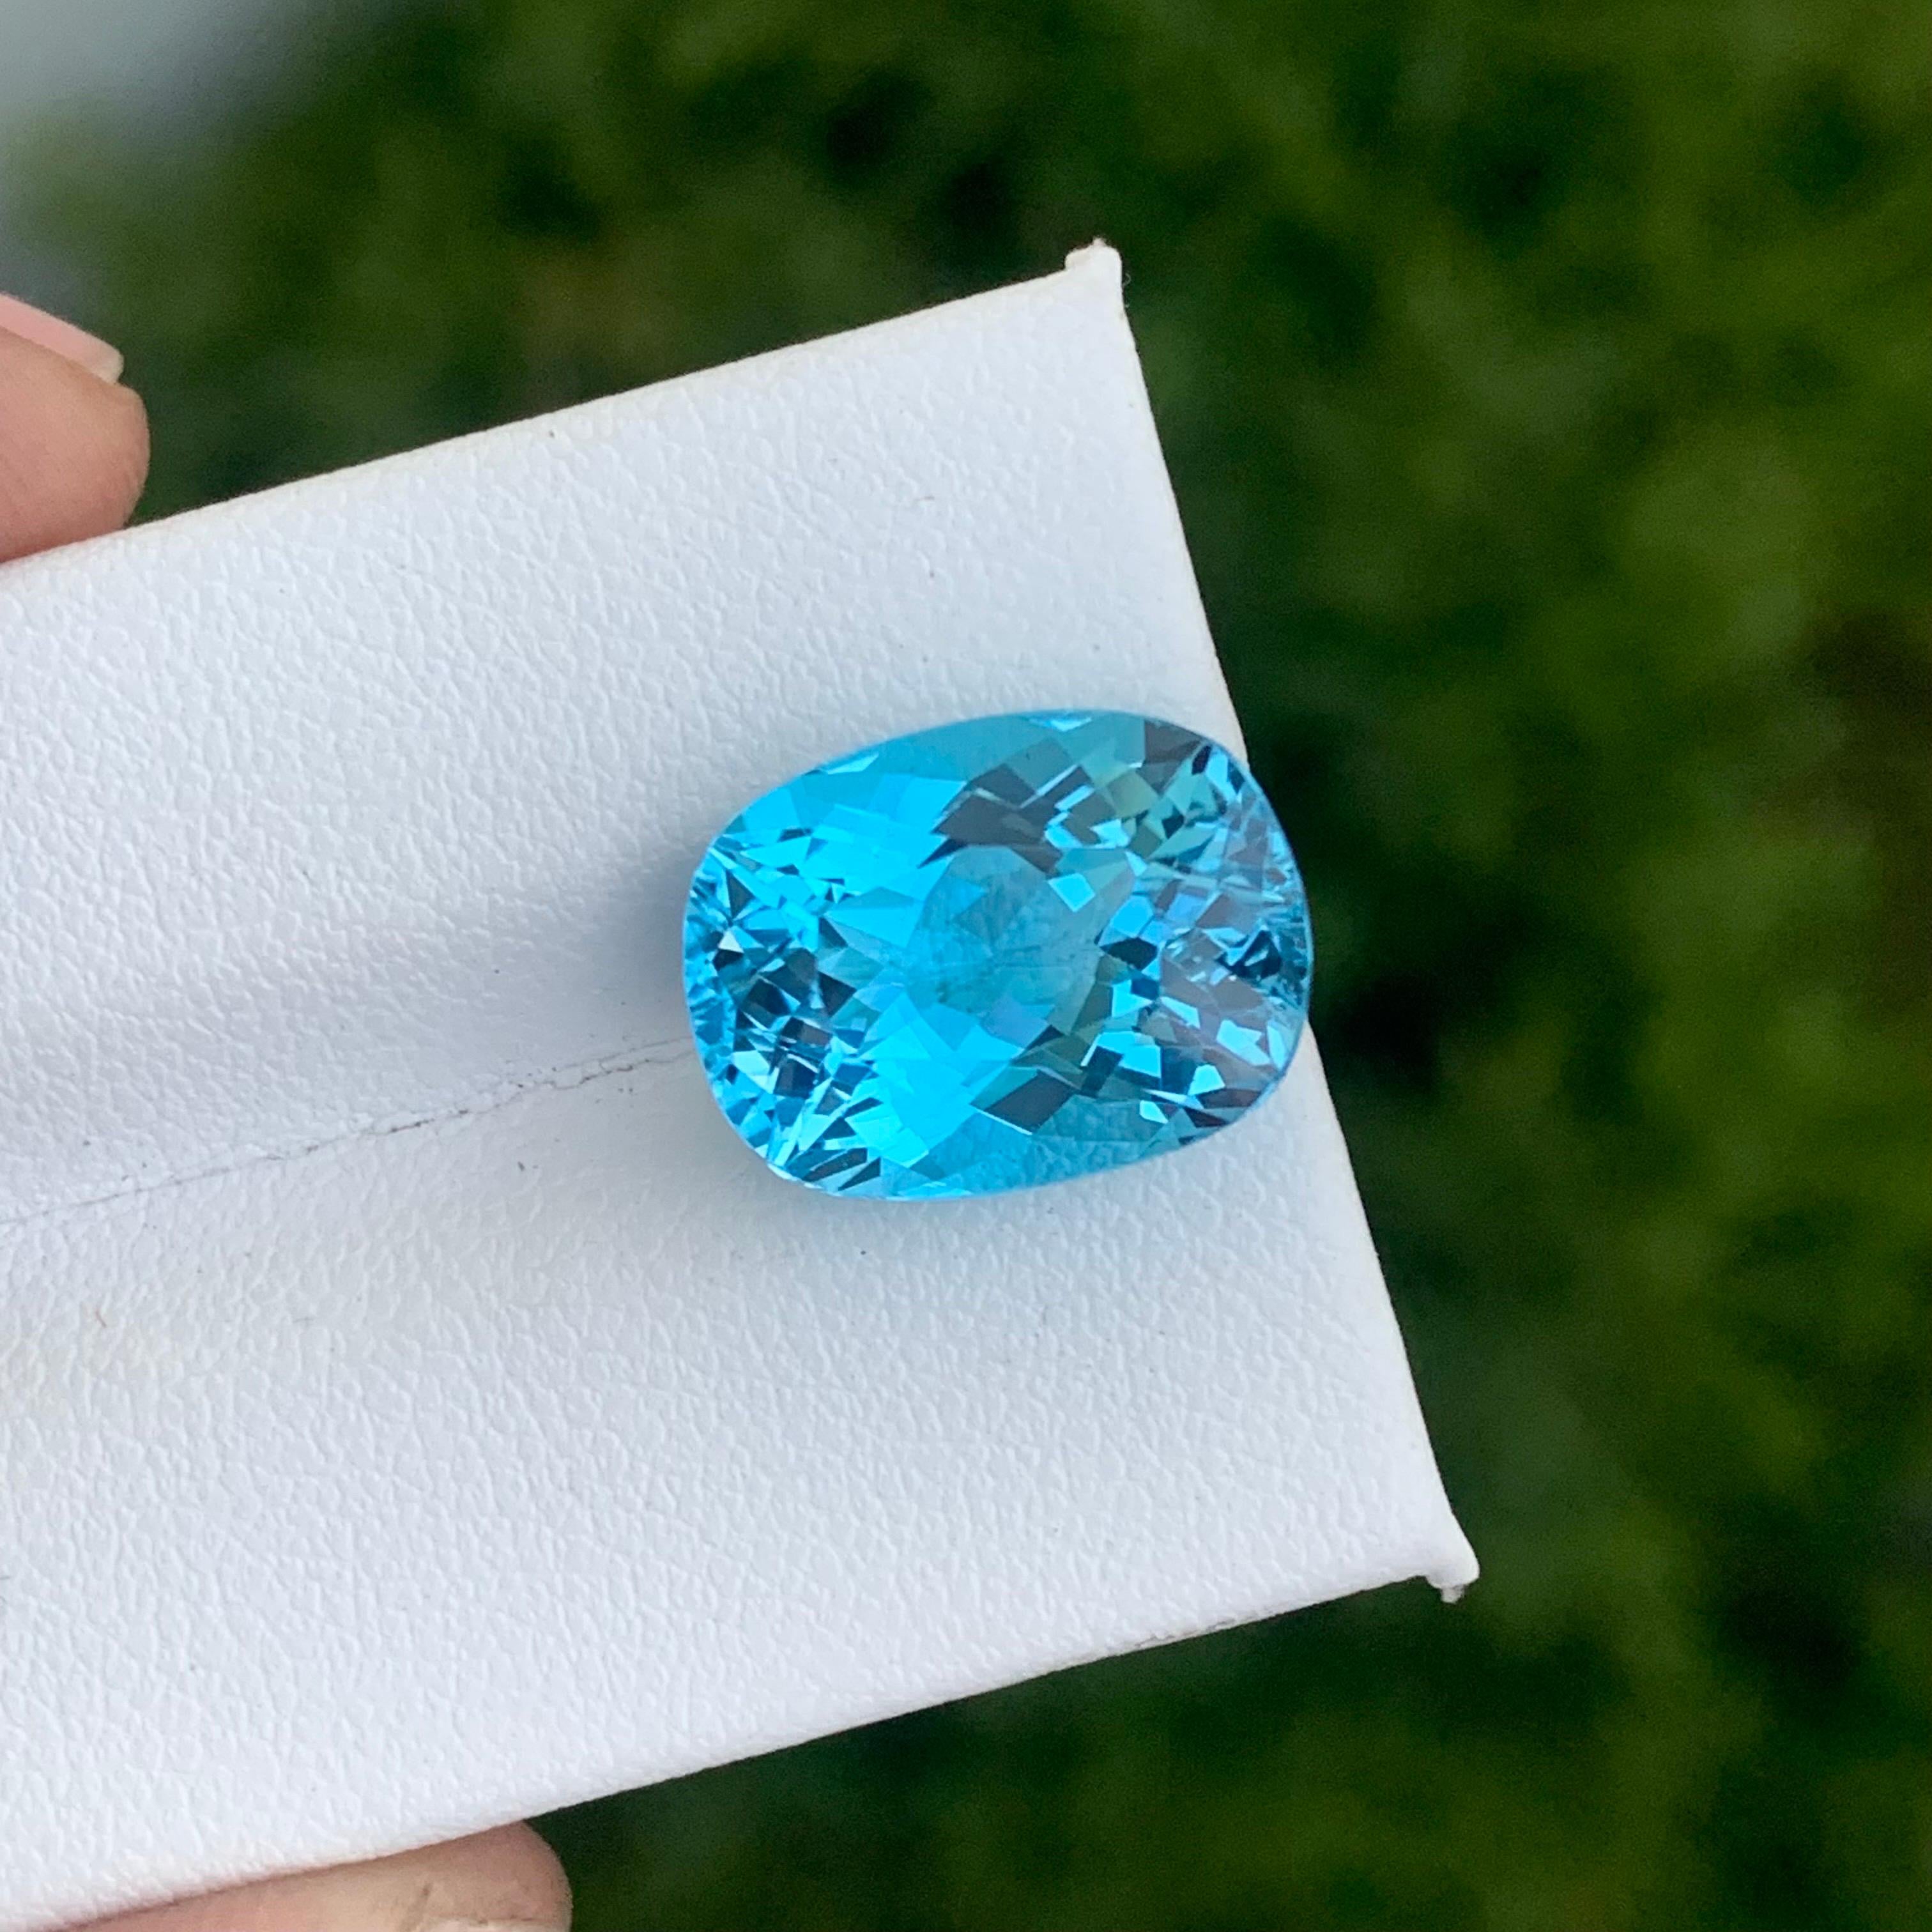 12.20 Cts Loose Sky Blue Topaz Gemstone from Brazil For Sale 2